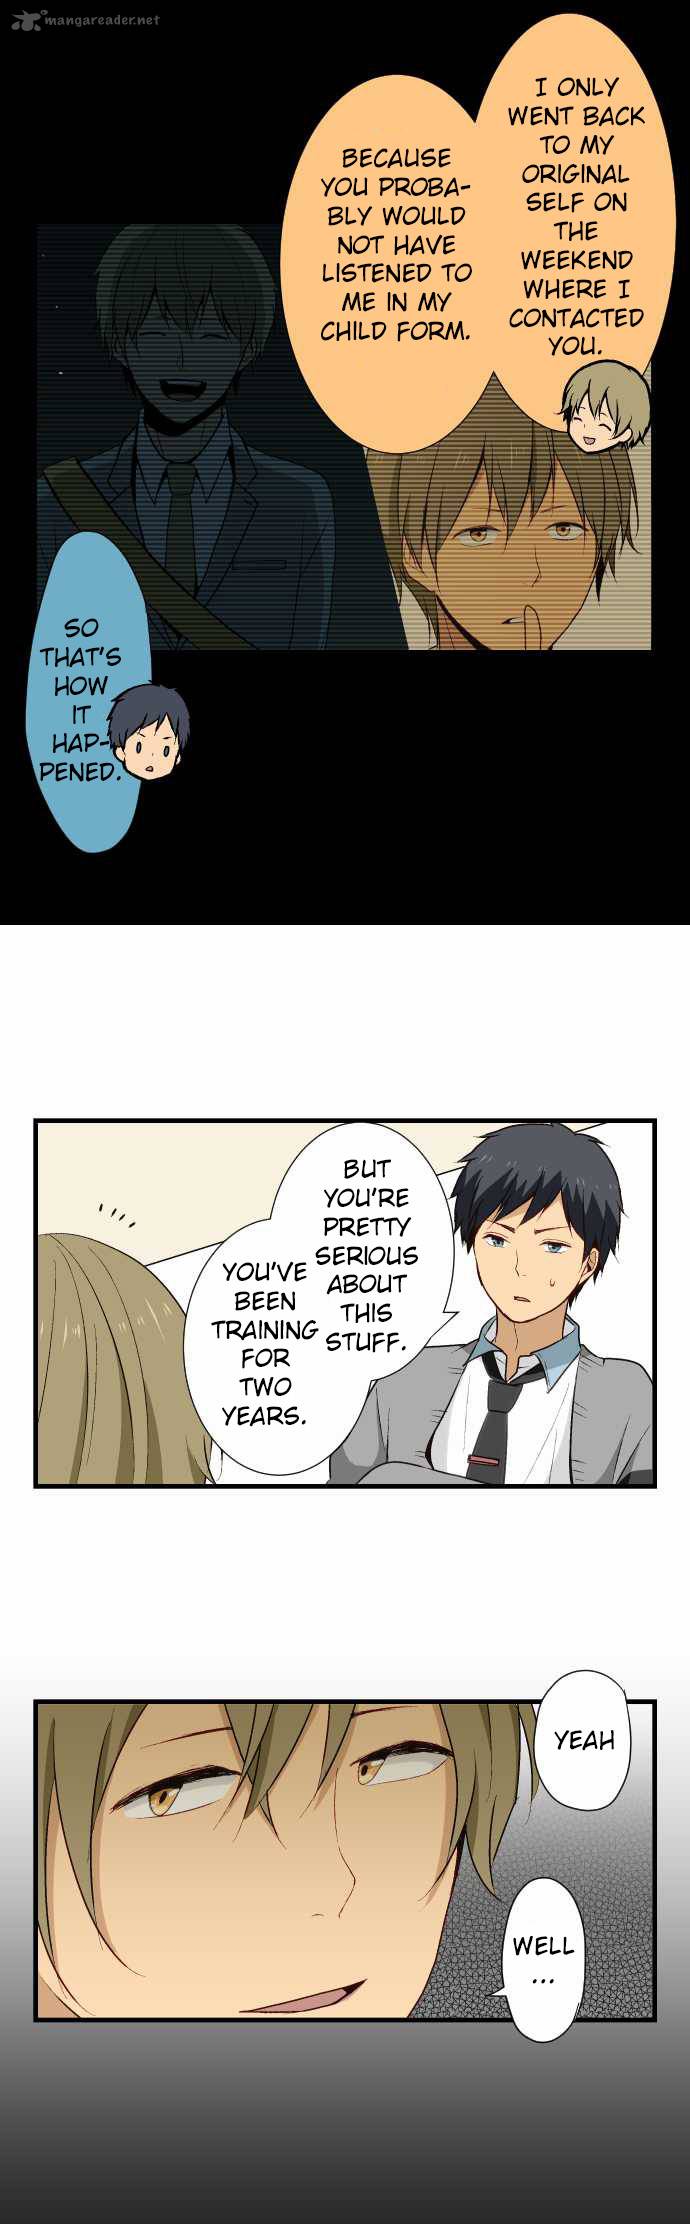 Relife 12 10